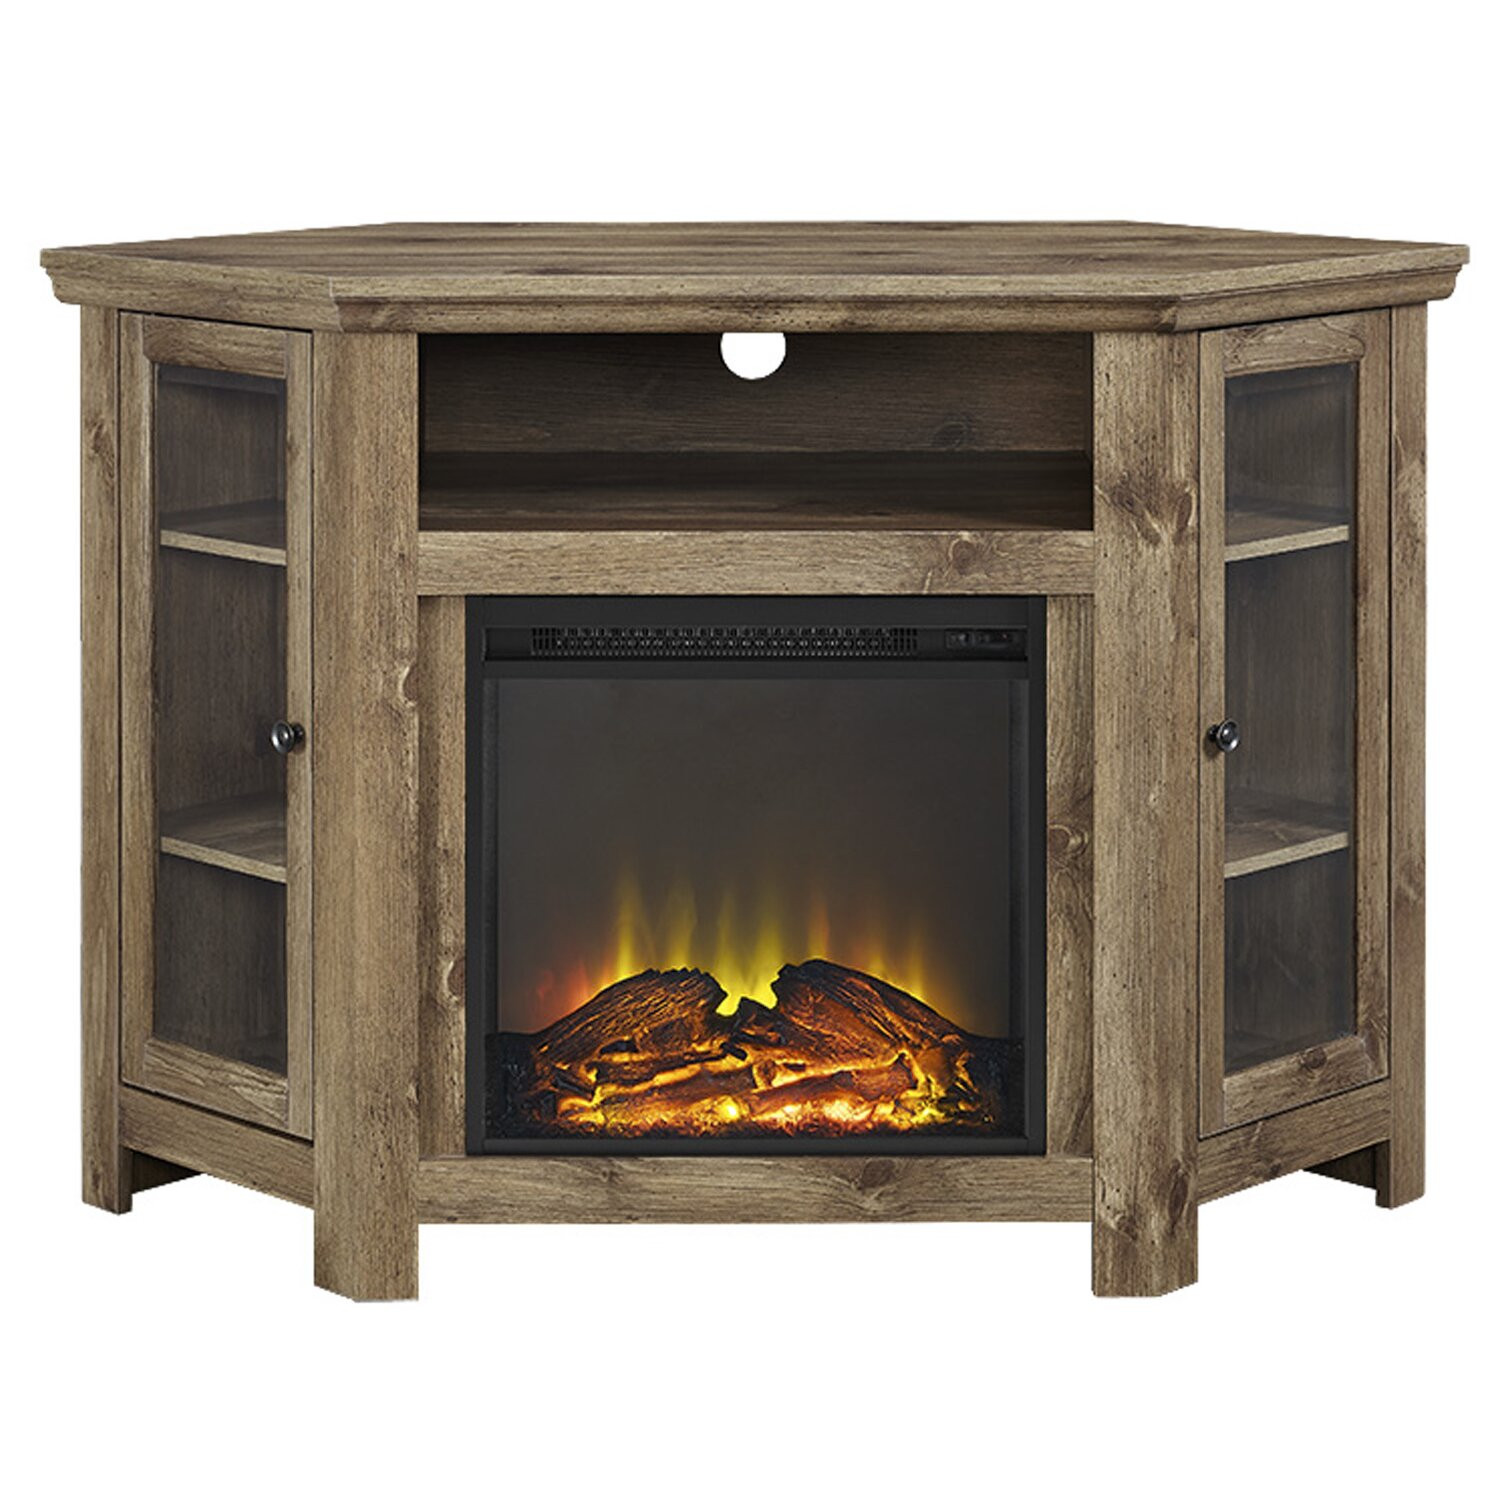 Rustic Electric Fireplace Tv Stand
 Union Rustic Rena Corner TV Stand with Electric Fireplace